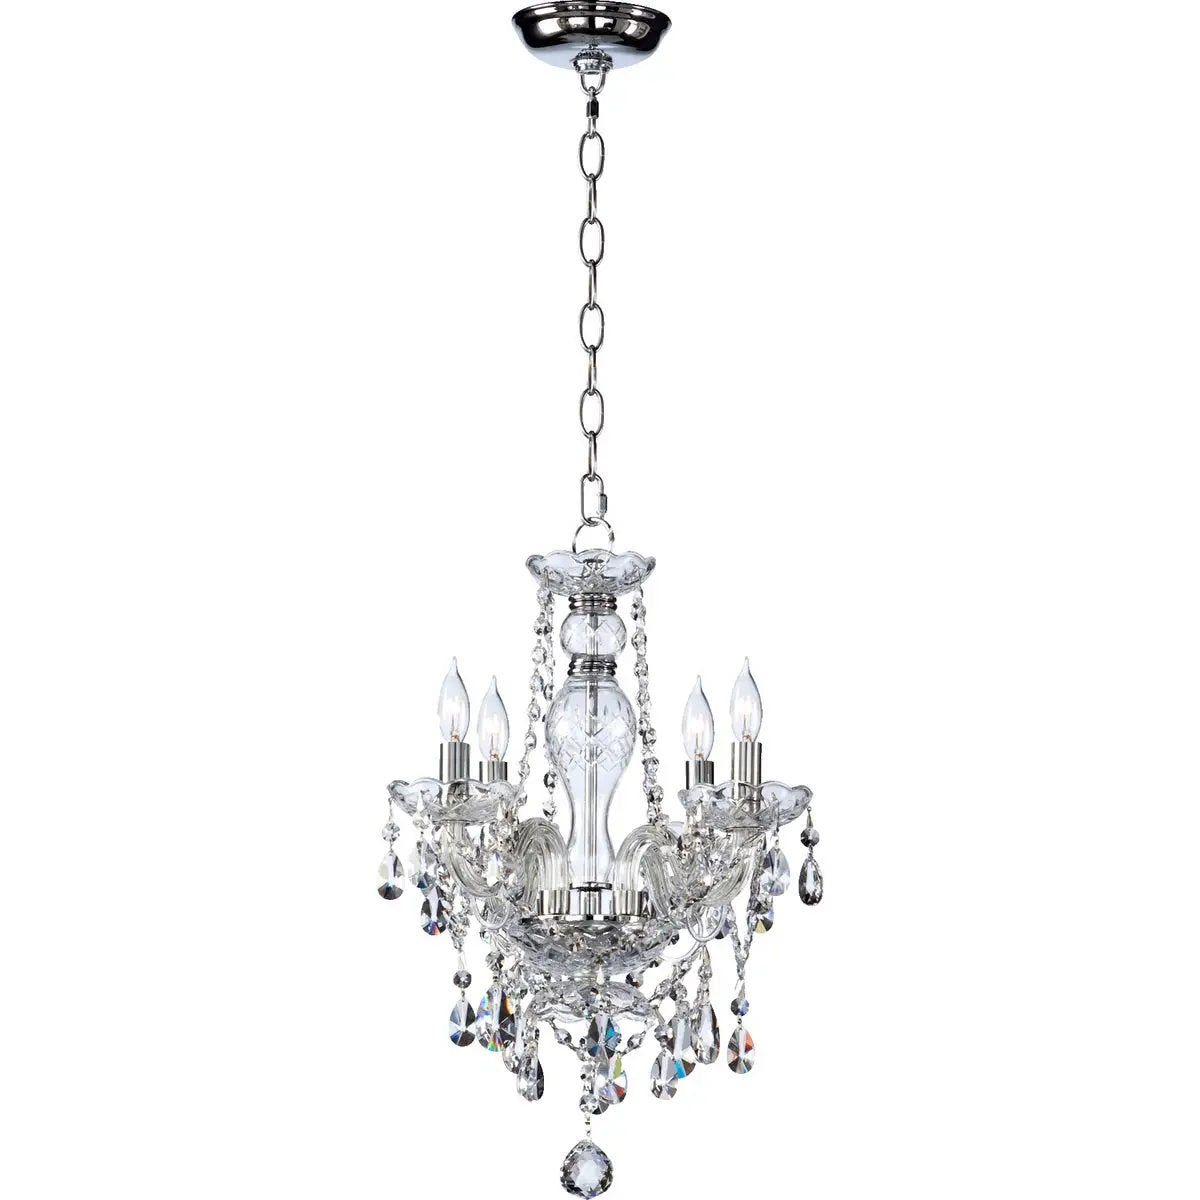 A close-up of a Mini Crystal Chandelier with tear drop crystal accents, creating dazzling, prismatic effects.